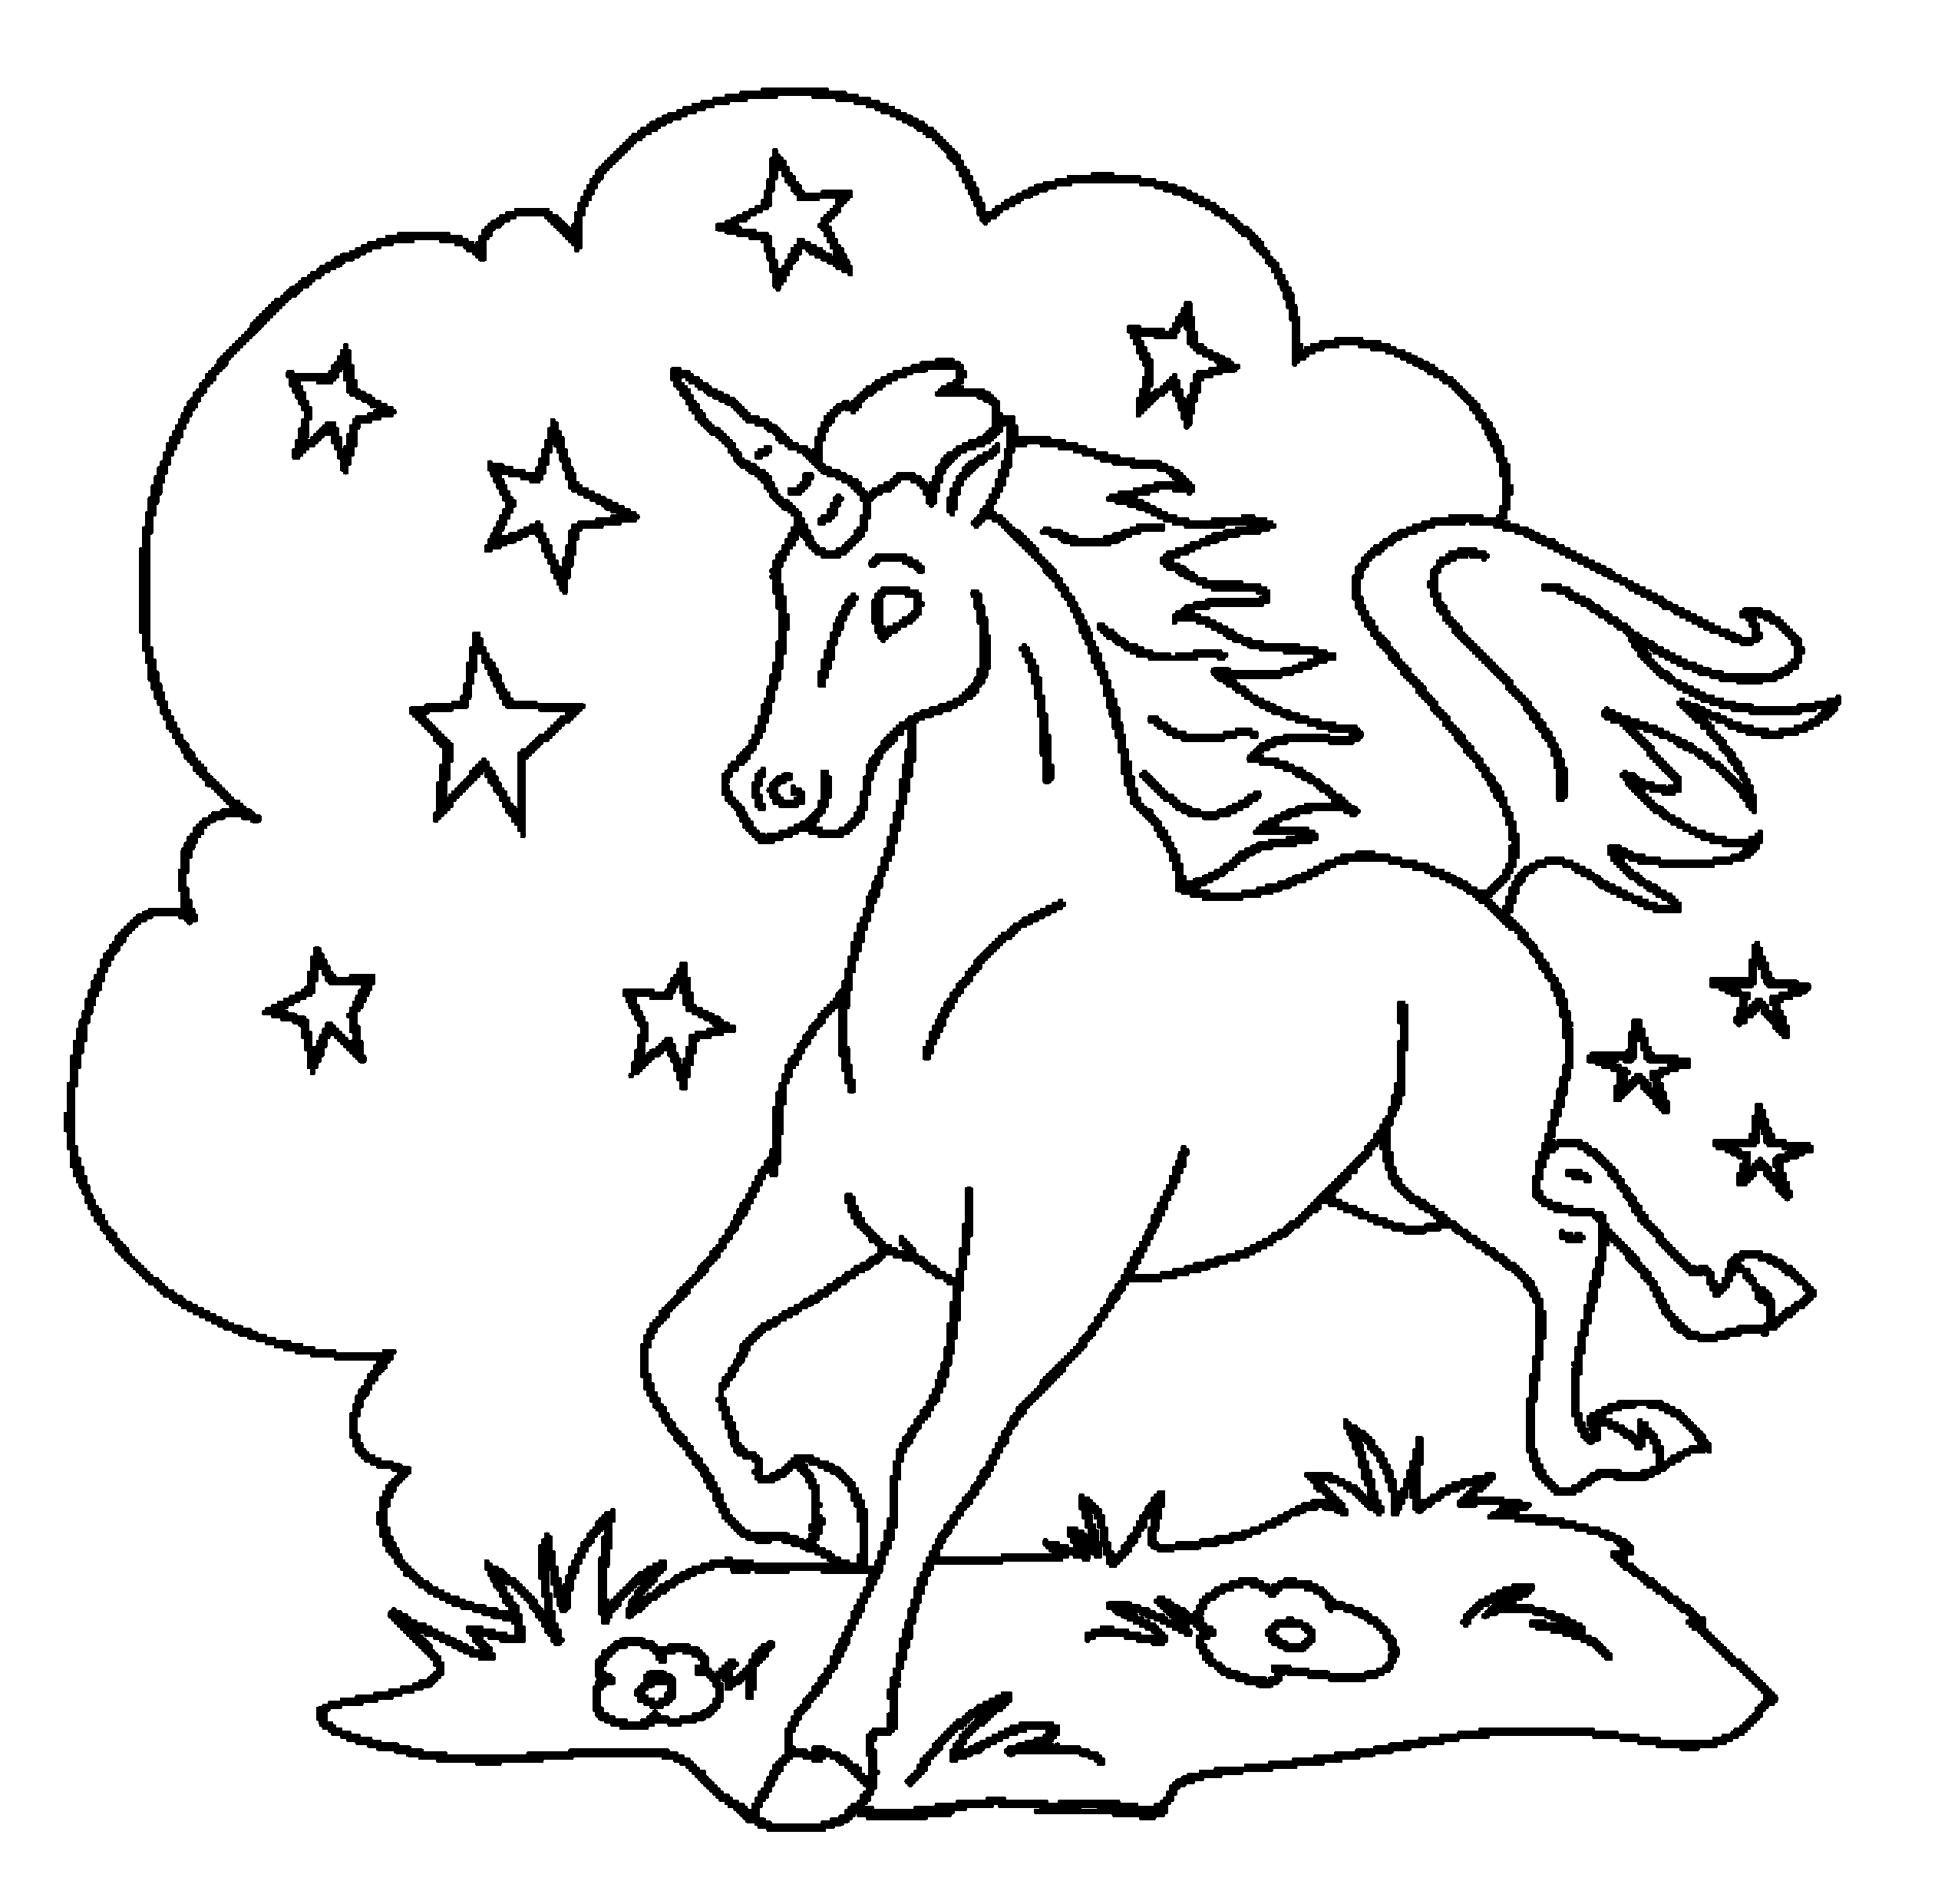 unicorn picture to color lovely unicorn coloring page free printable coloring pages unicorn to picture color 